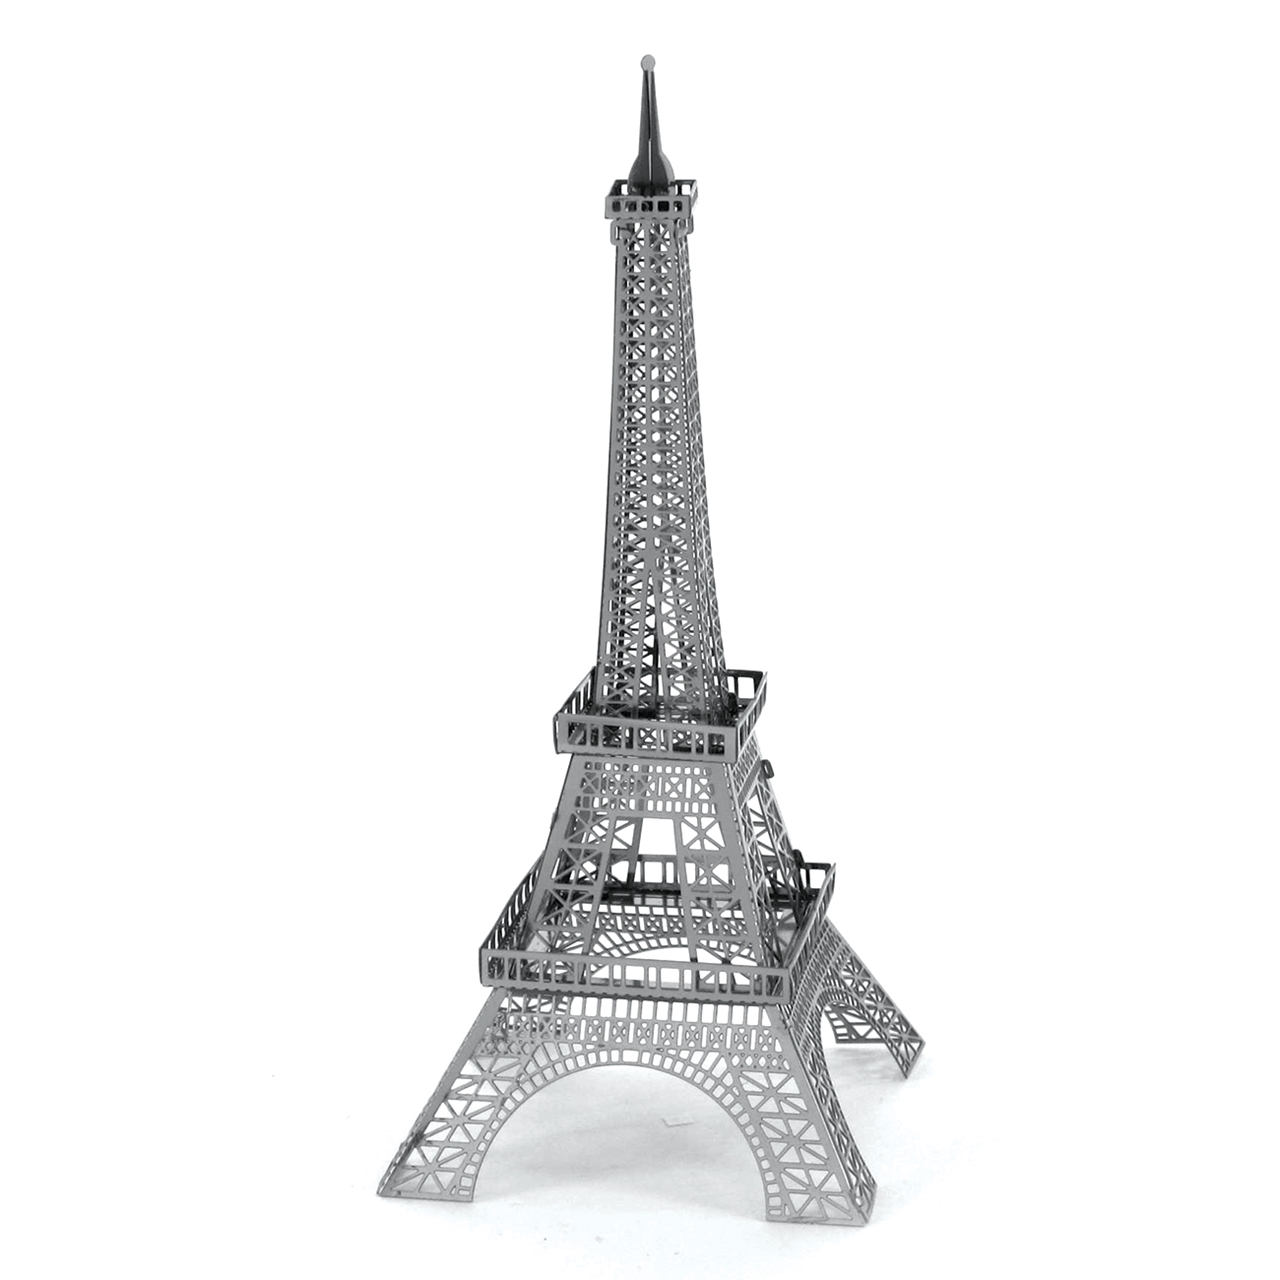 Fascinations Metal Earth Eiffel Tower ICONX Laser Cut 3D Model Collectibles 